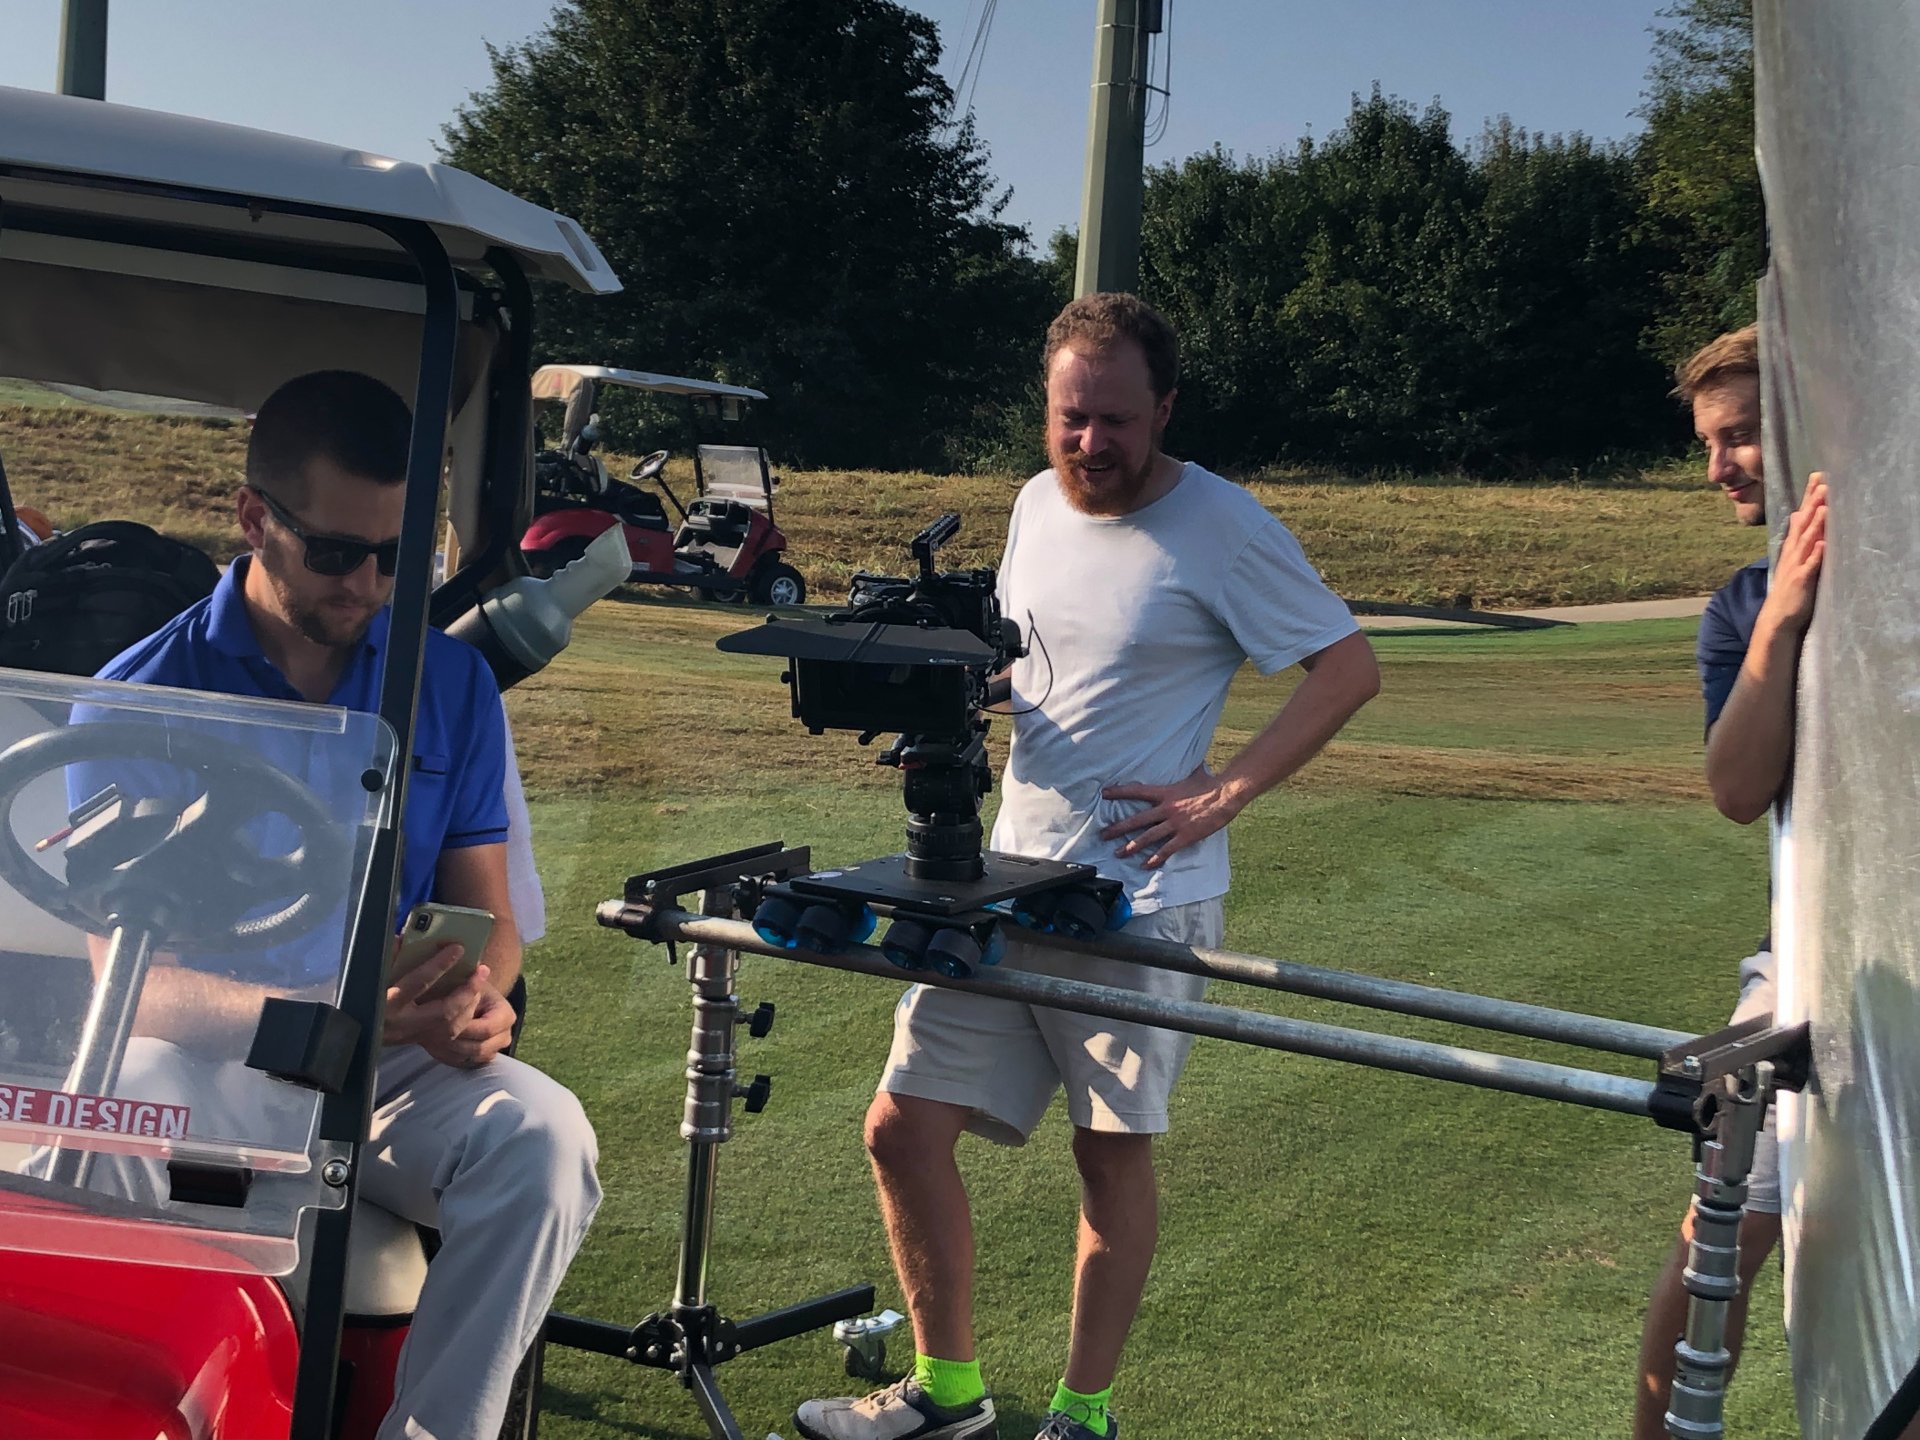 Behind the scenes own your golf game